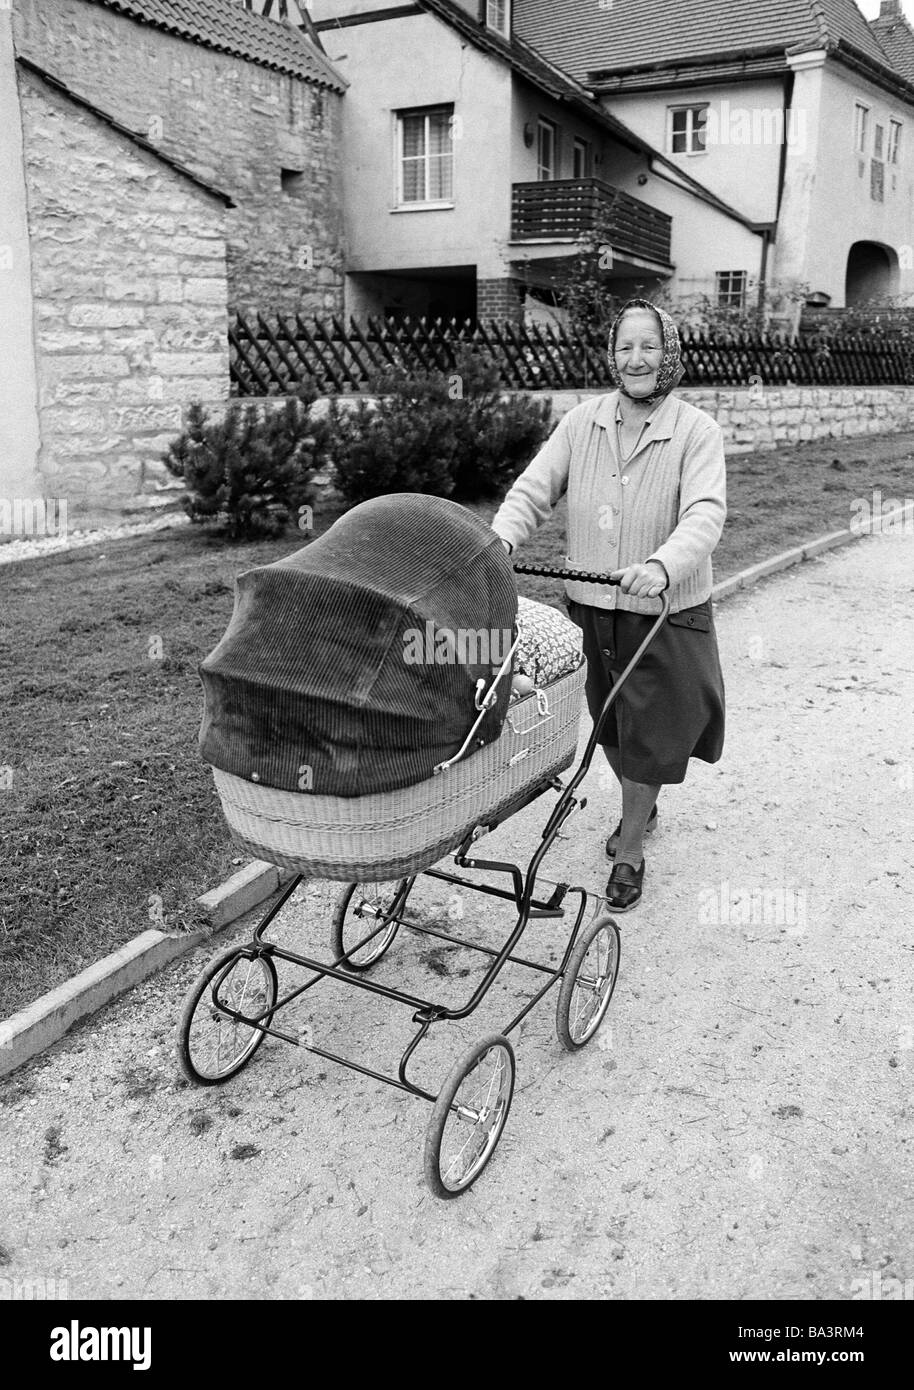 Eighties, black and white photo, people, elder people, older woman walking with a buggy, waistcoat, skirt, kerchief, aged 70 to 80 years Stock Photo